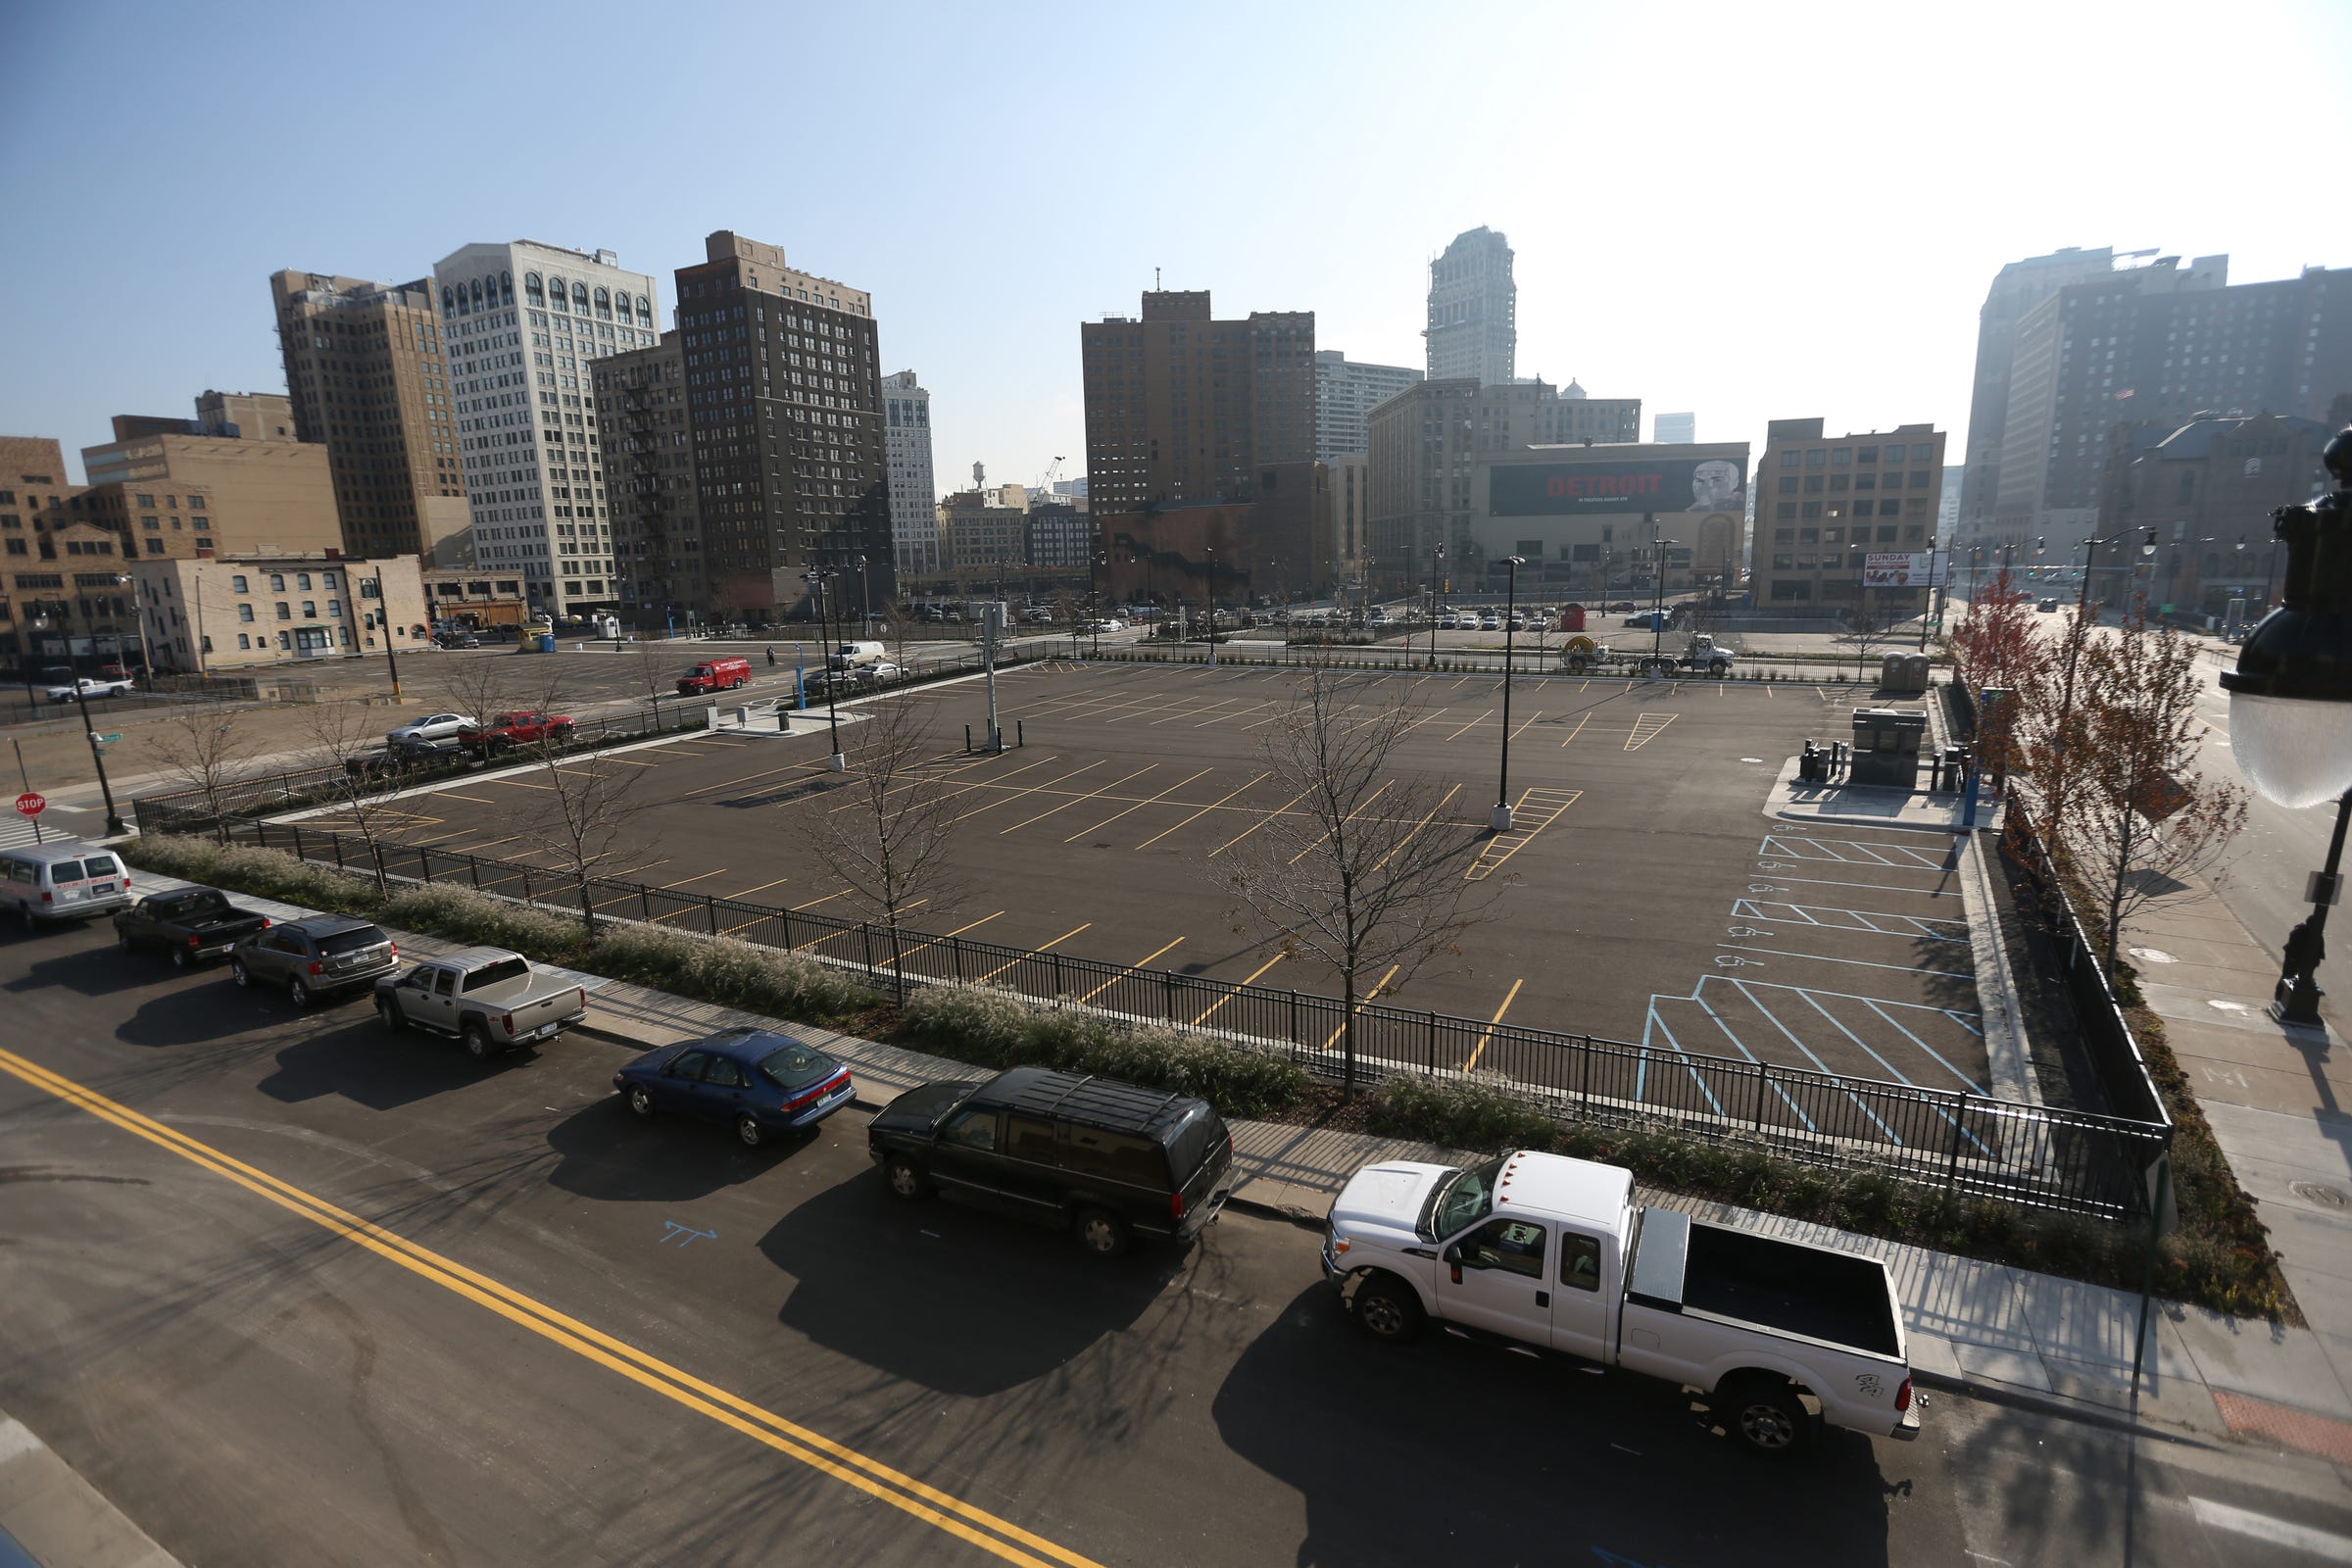 This surface lot is owned by Olympia Entertainment at 2130 Cass avenue in Detroit.